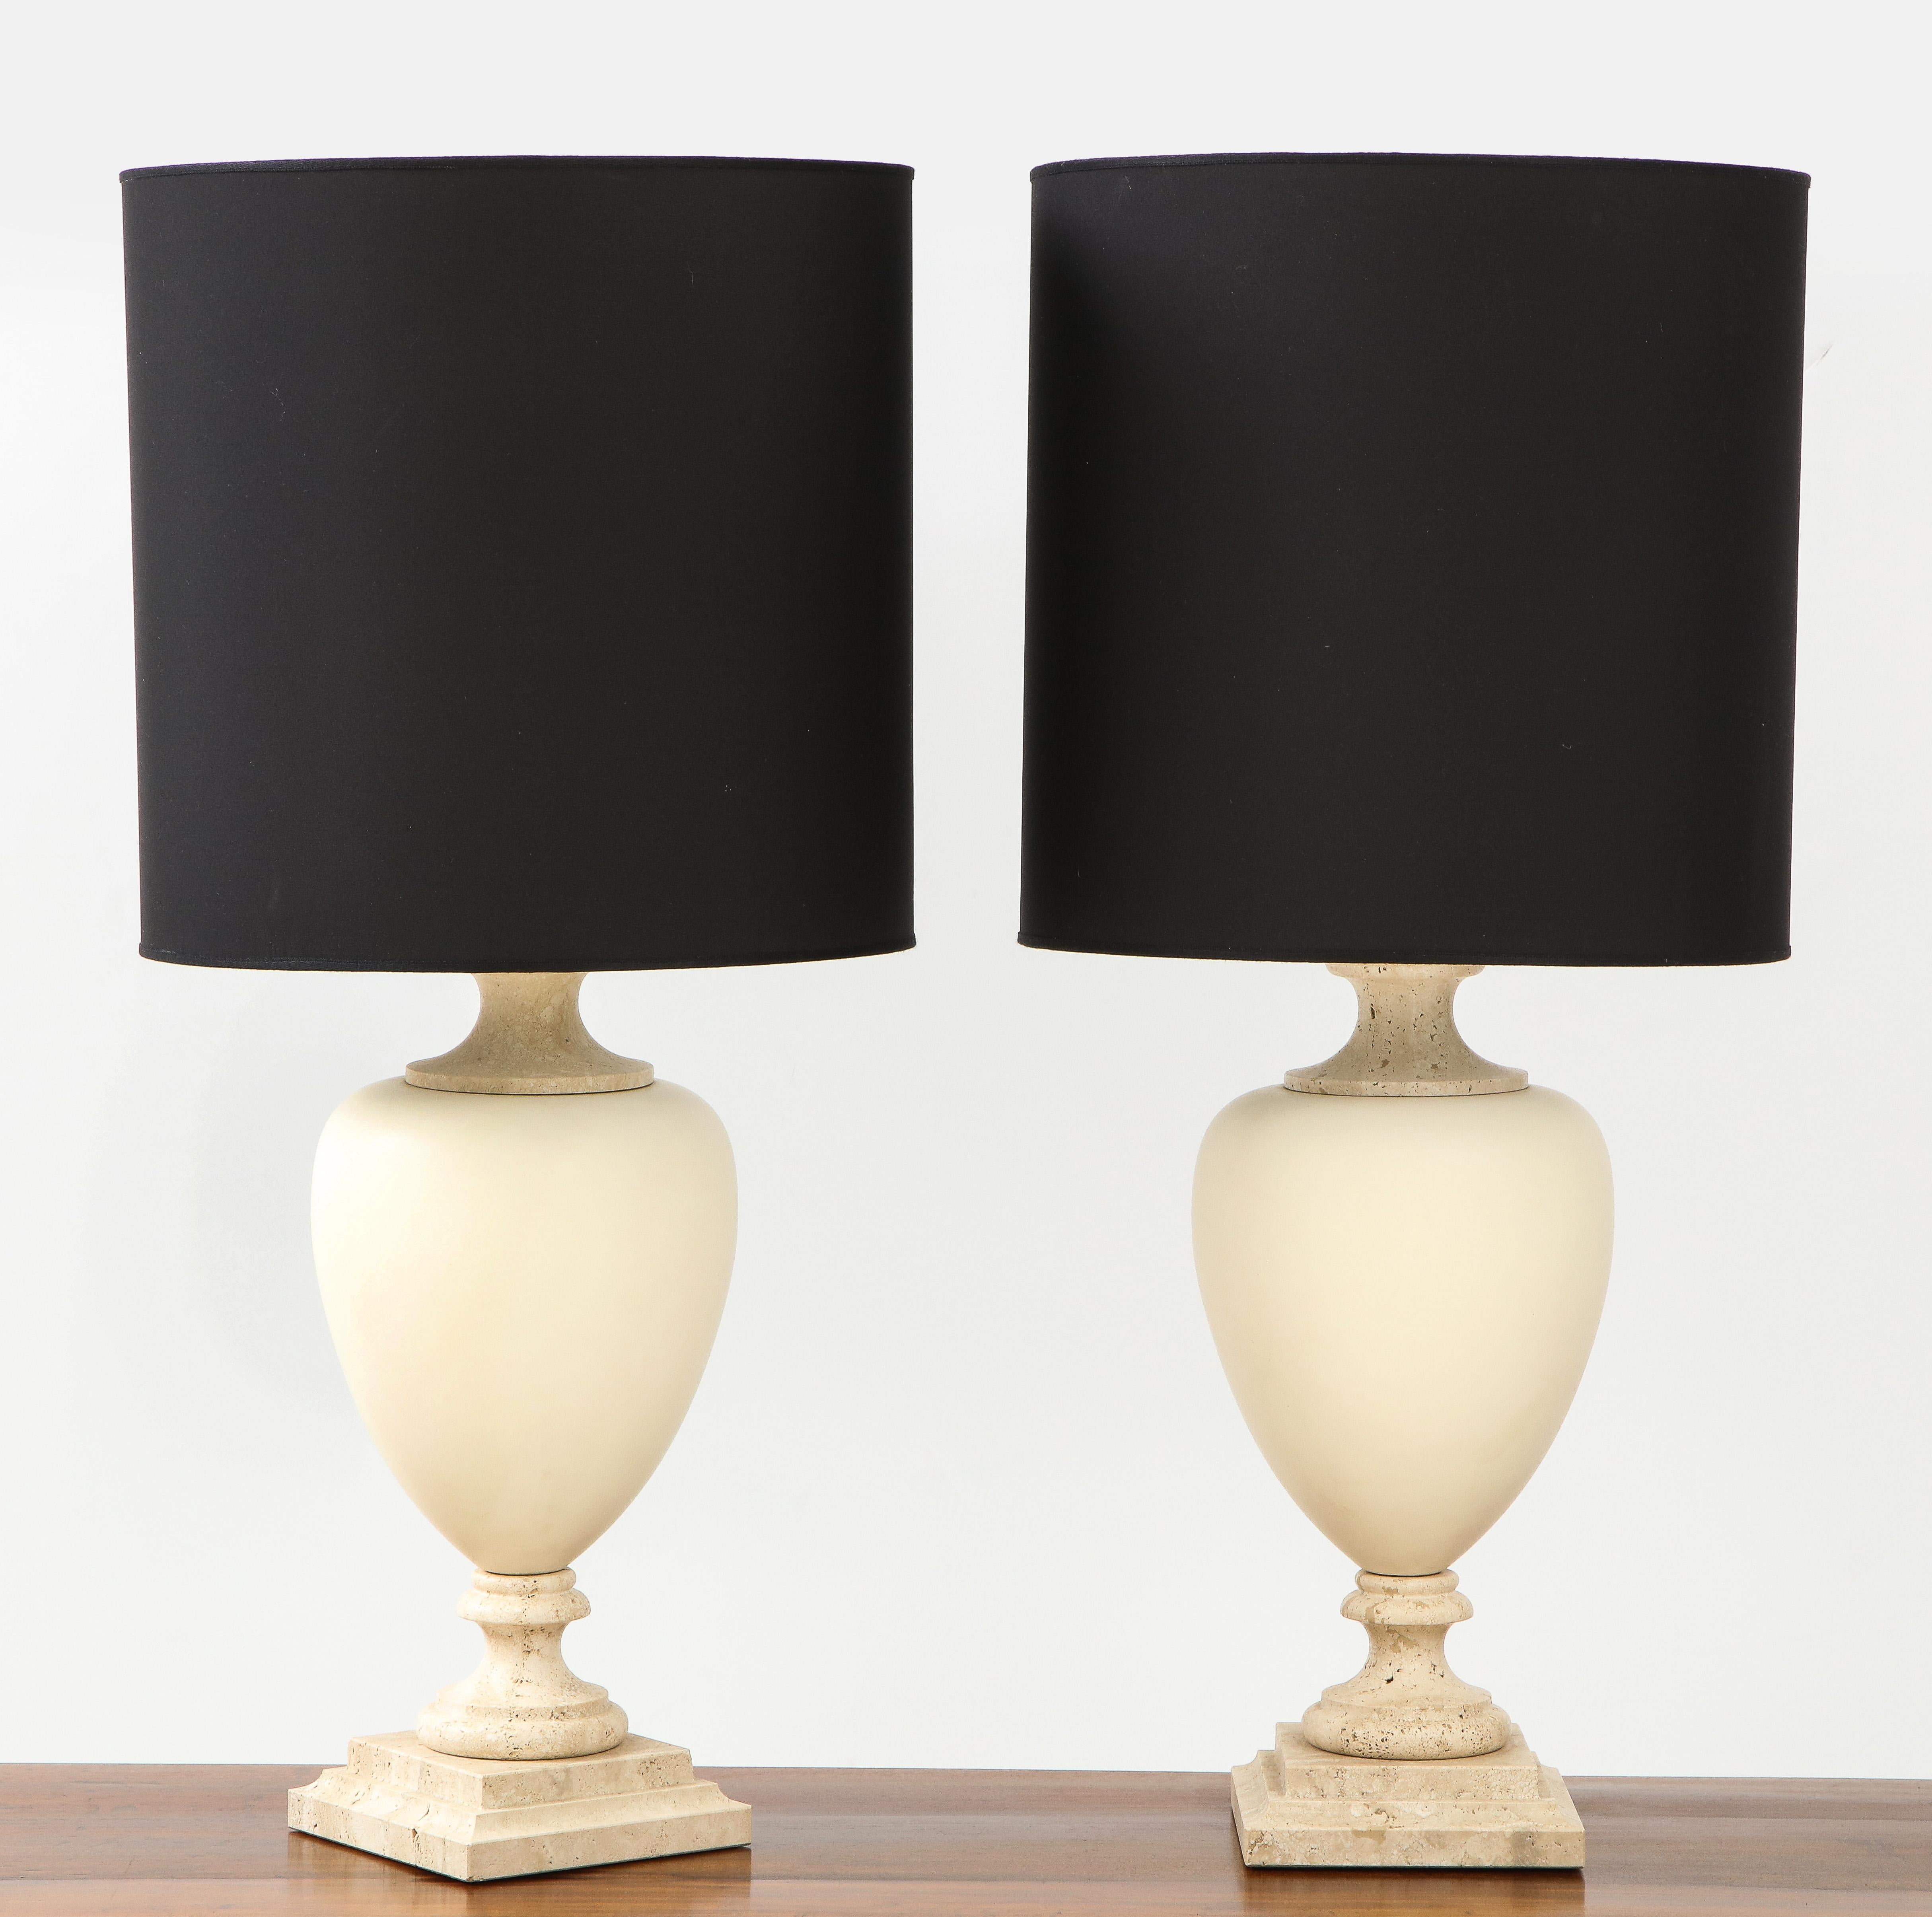 Pair of Italian travertine and ceramic baluster form table lamps, mounted on a square base. Includes custom black shades. (Re-wired for USA standards).
Italy, circa late 1970s-1980s
Size: 34 1/2